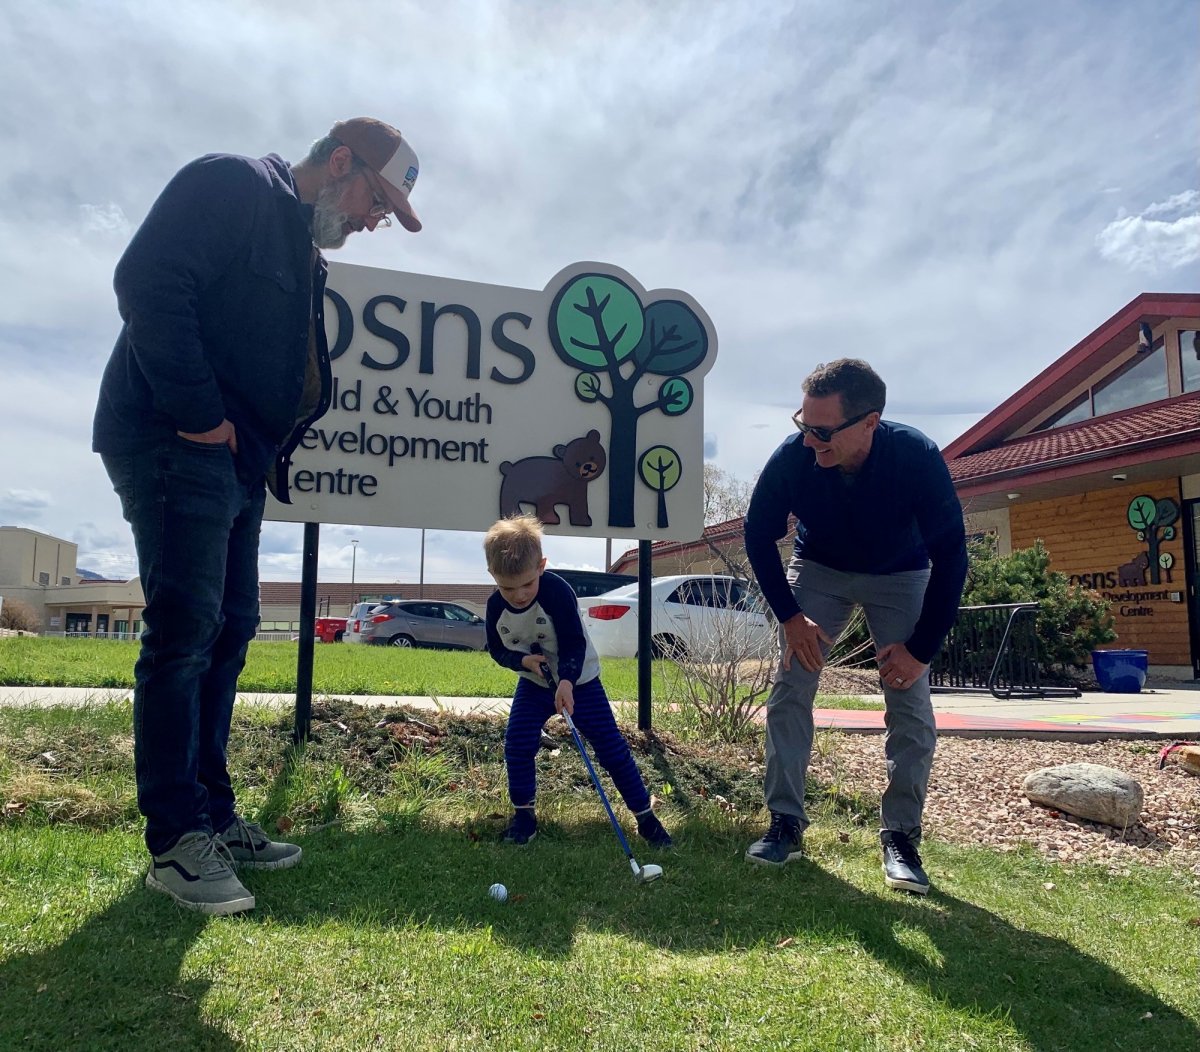 May 1, 2022 OSNS Charity golf announcement